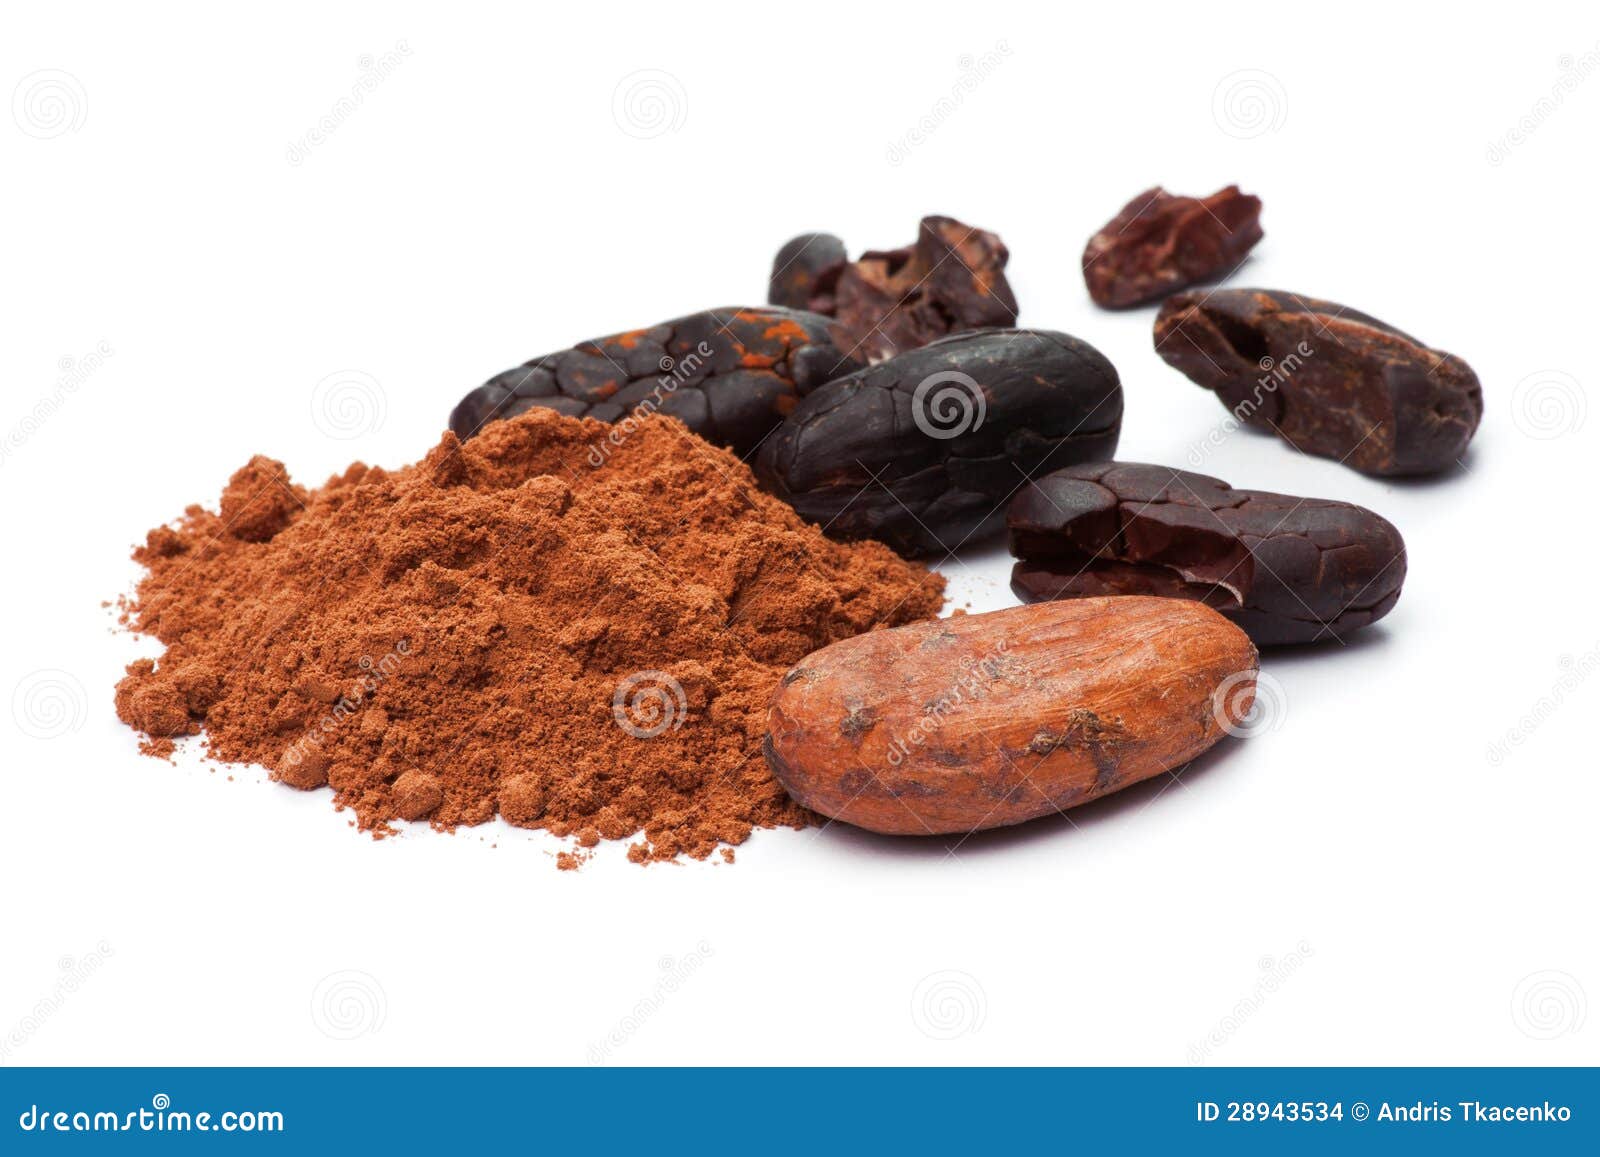 cacao beans and cacao powder